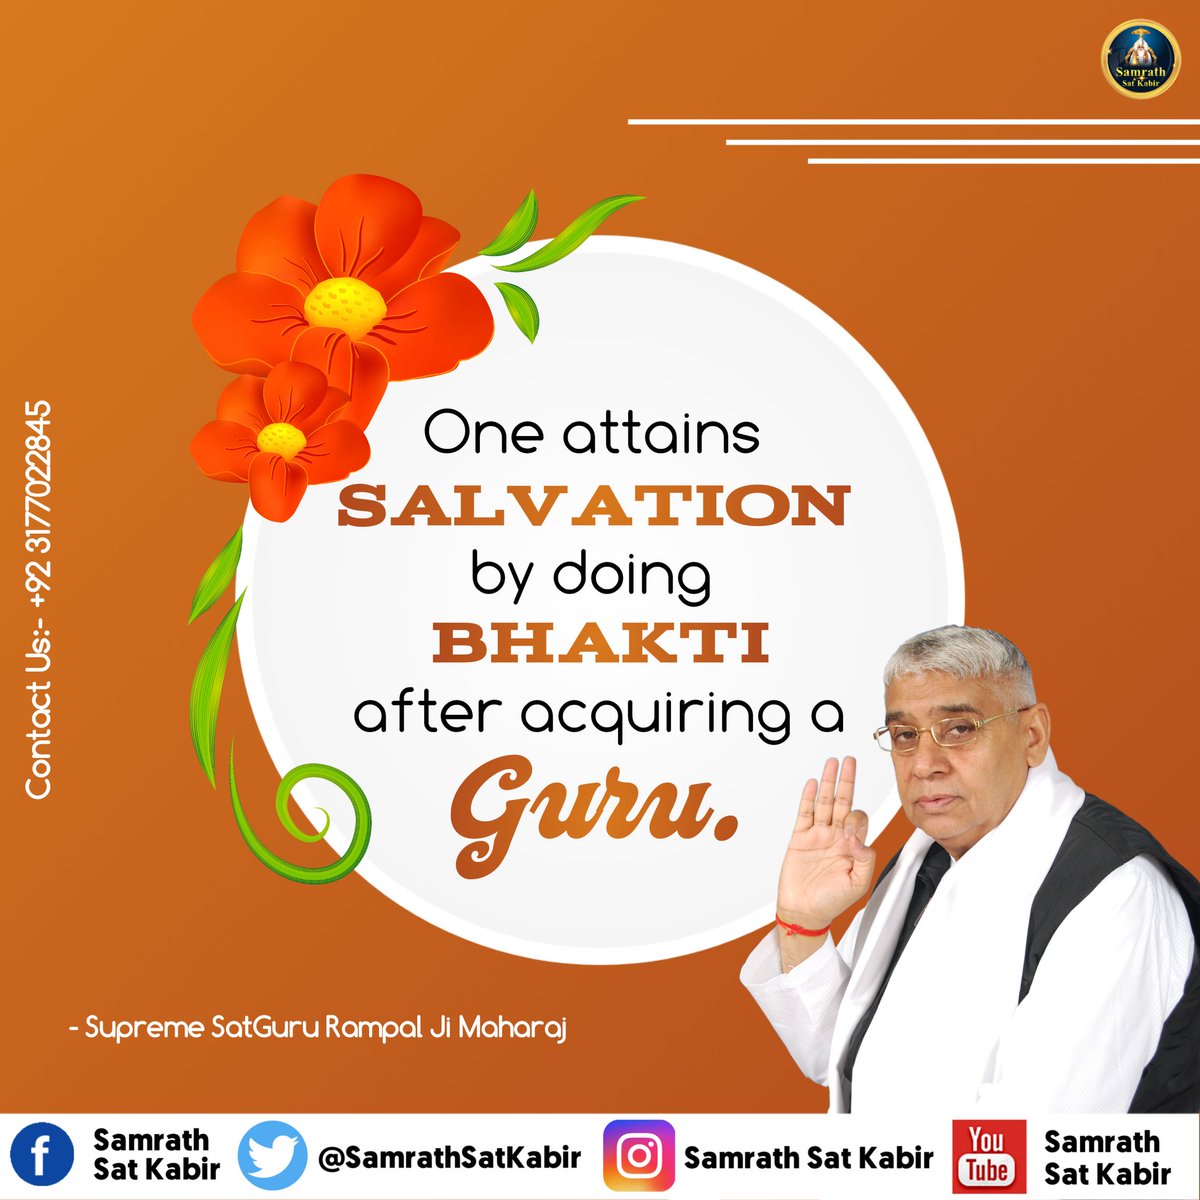 Today's #TuesdayMorning Thoughts.
Only Satguru (True Guru) can eliminate the severe disease of Death and Birth.
Amongst millions of Gurus/Guides only @SaintRampalJiM is showing the true spiritual path in accordance with our holy scriptures.
- #GodMorningTuesday